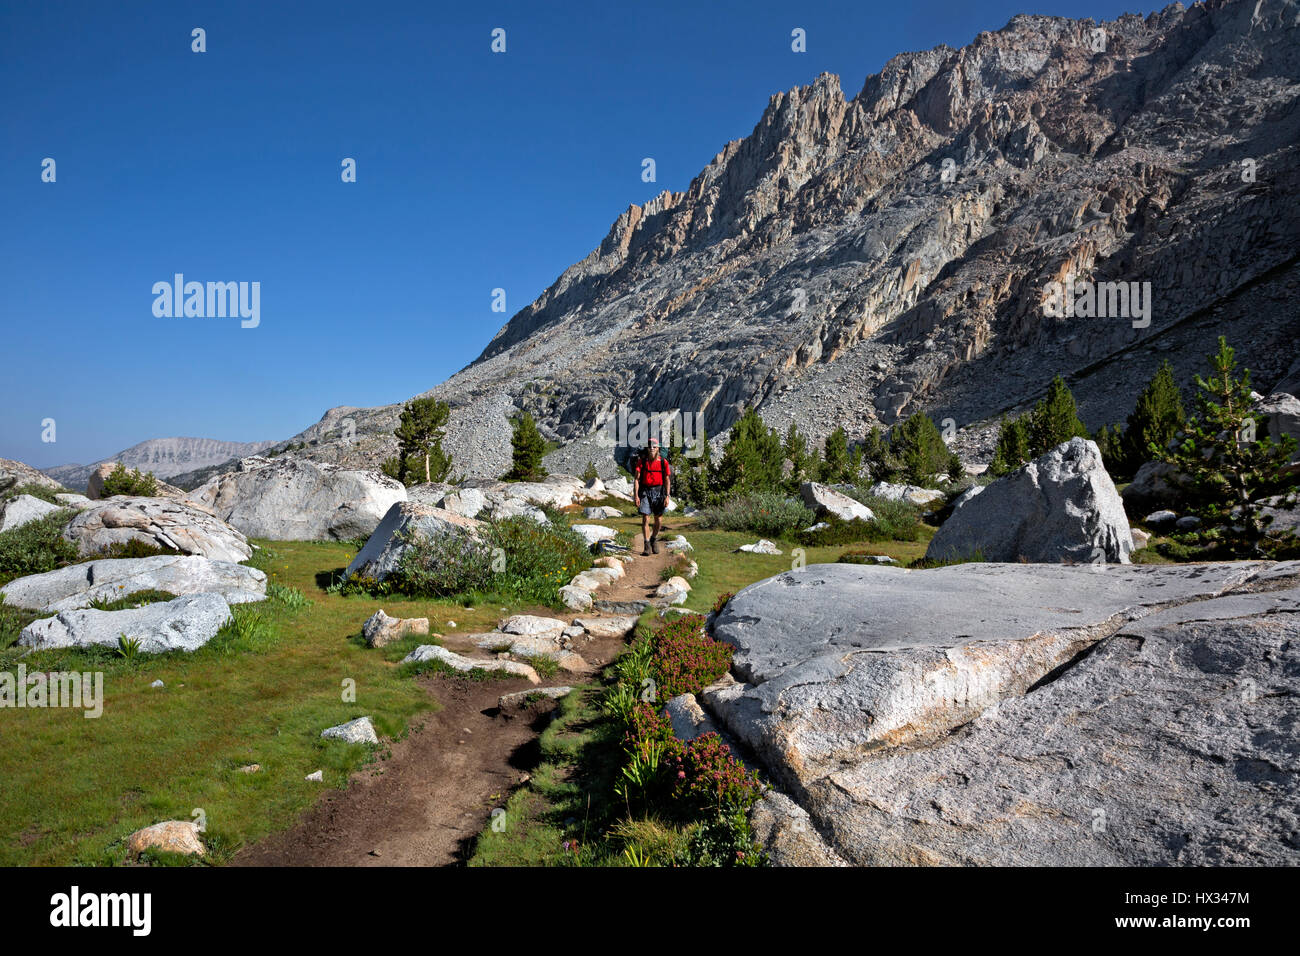 CA03118-00...CALIFORNIA - Backpacker above Evolution Lake in the combined JMT/PCT in Kings Canyon National Park. Stock Photo